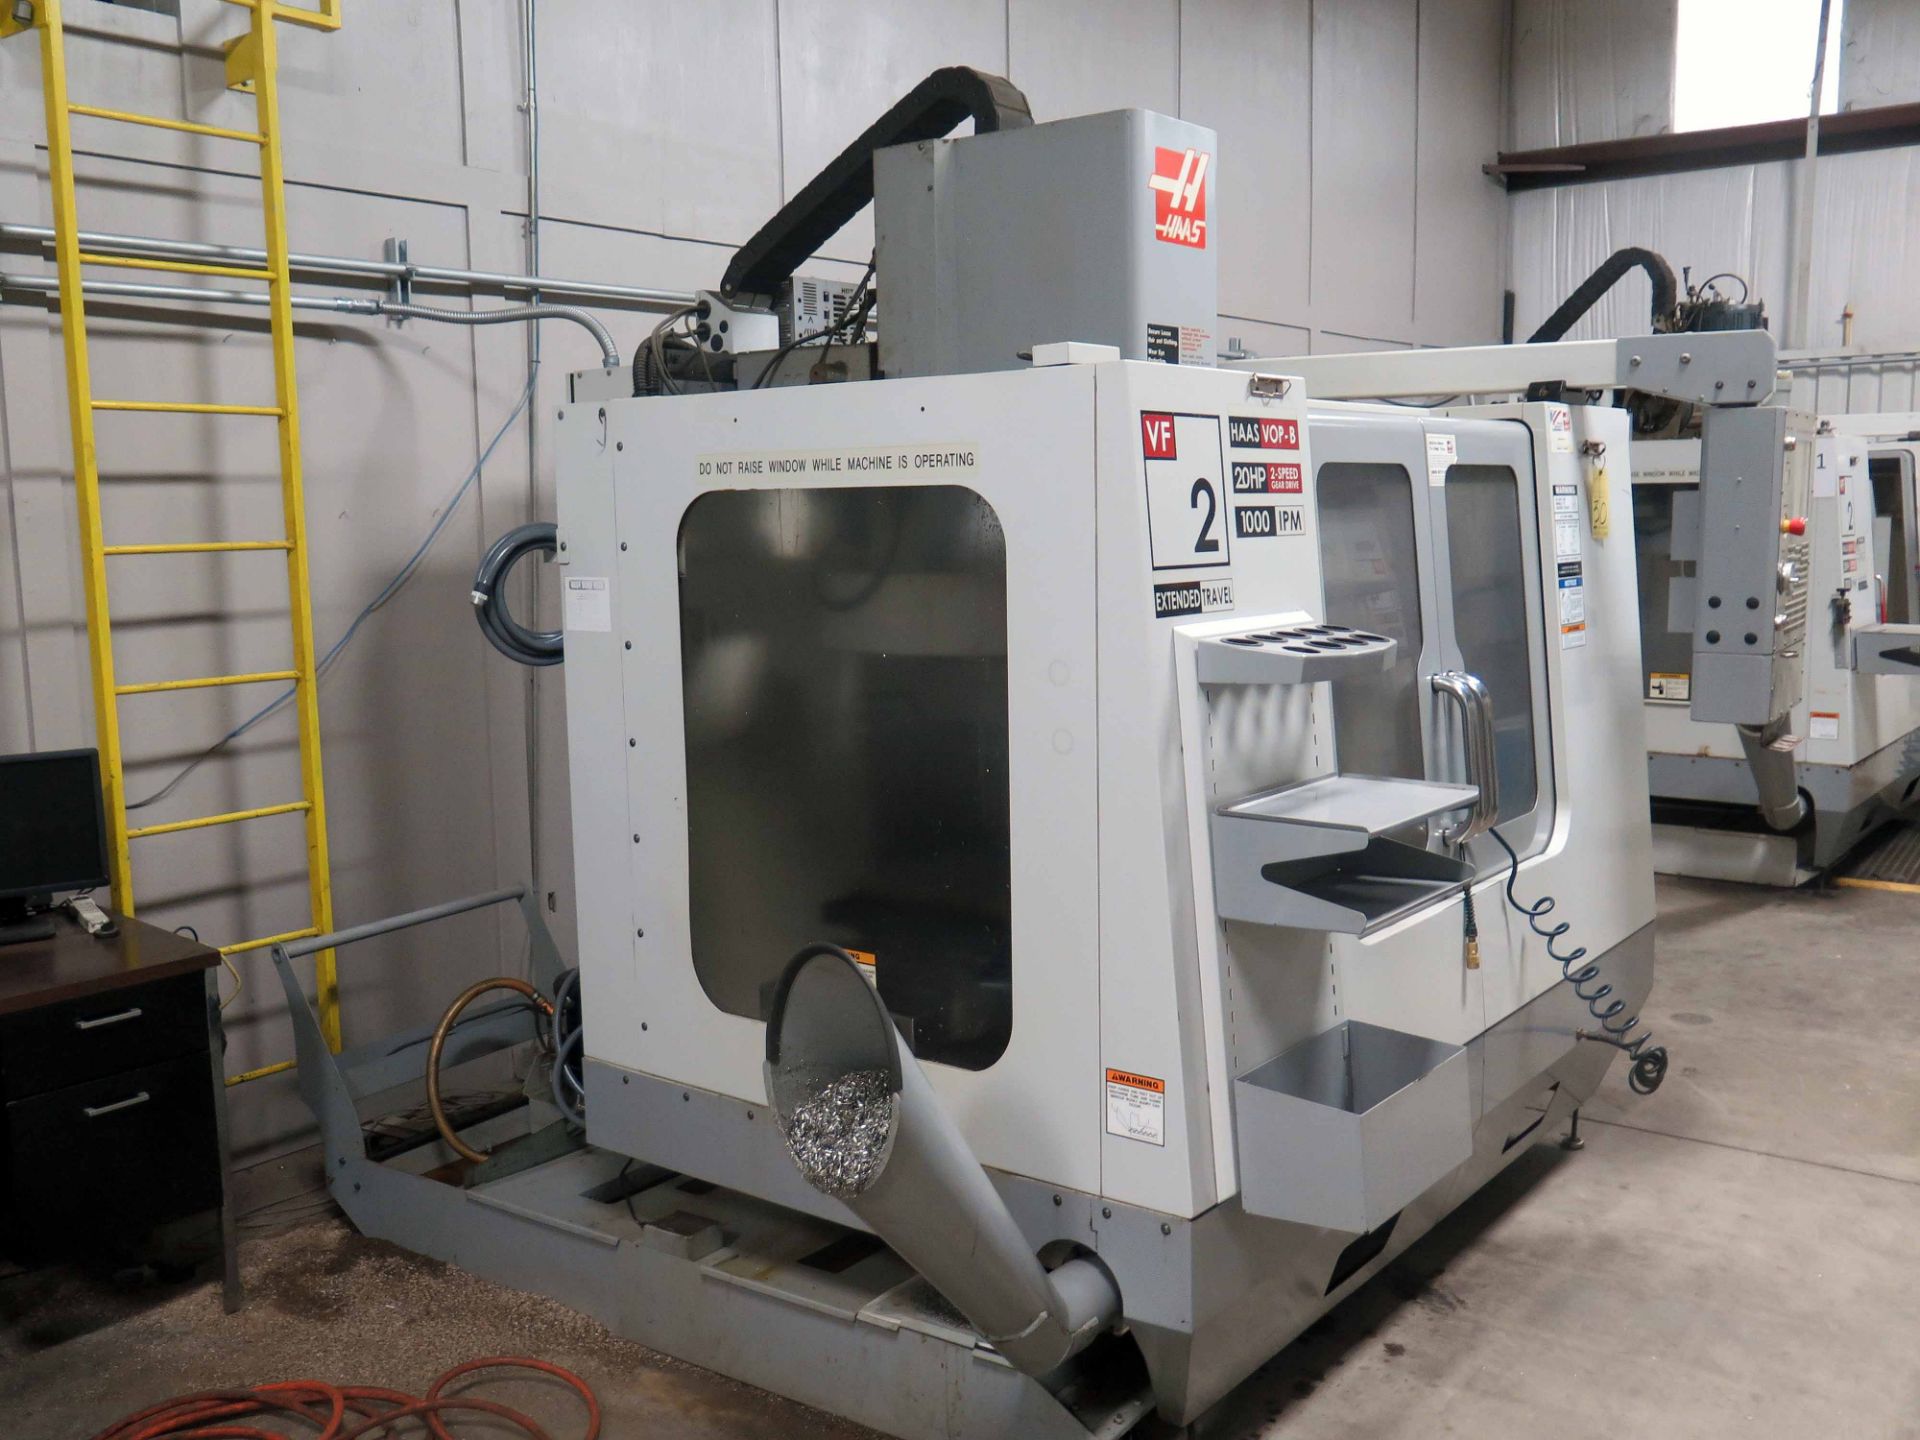 CNC VERTICAL MACHINING CENTER, HAAS MDL. VF-2BYT, new 2006, extended travel, Haas V0P-B CNC control, - Image 4 of 6